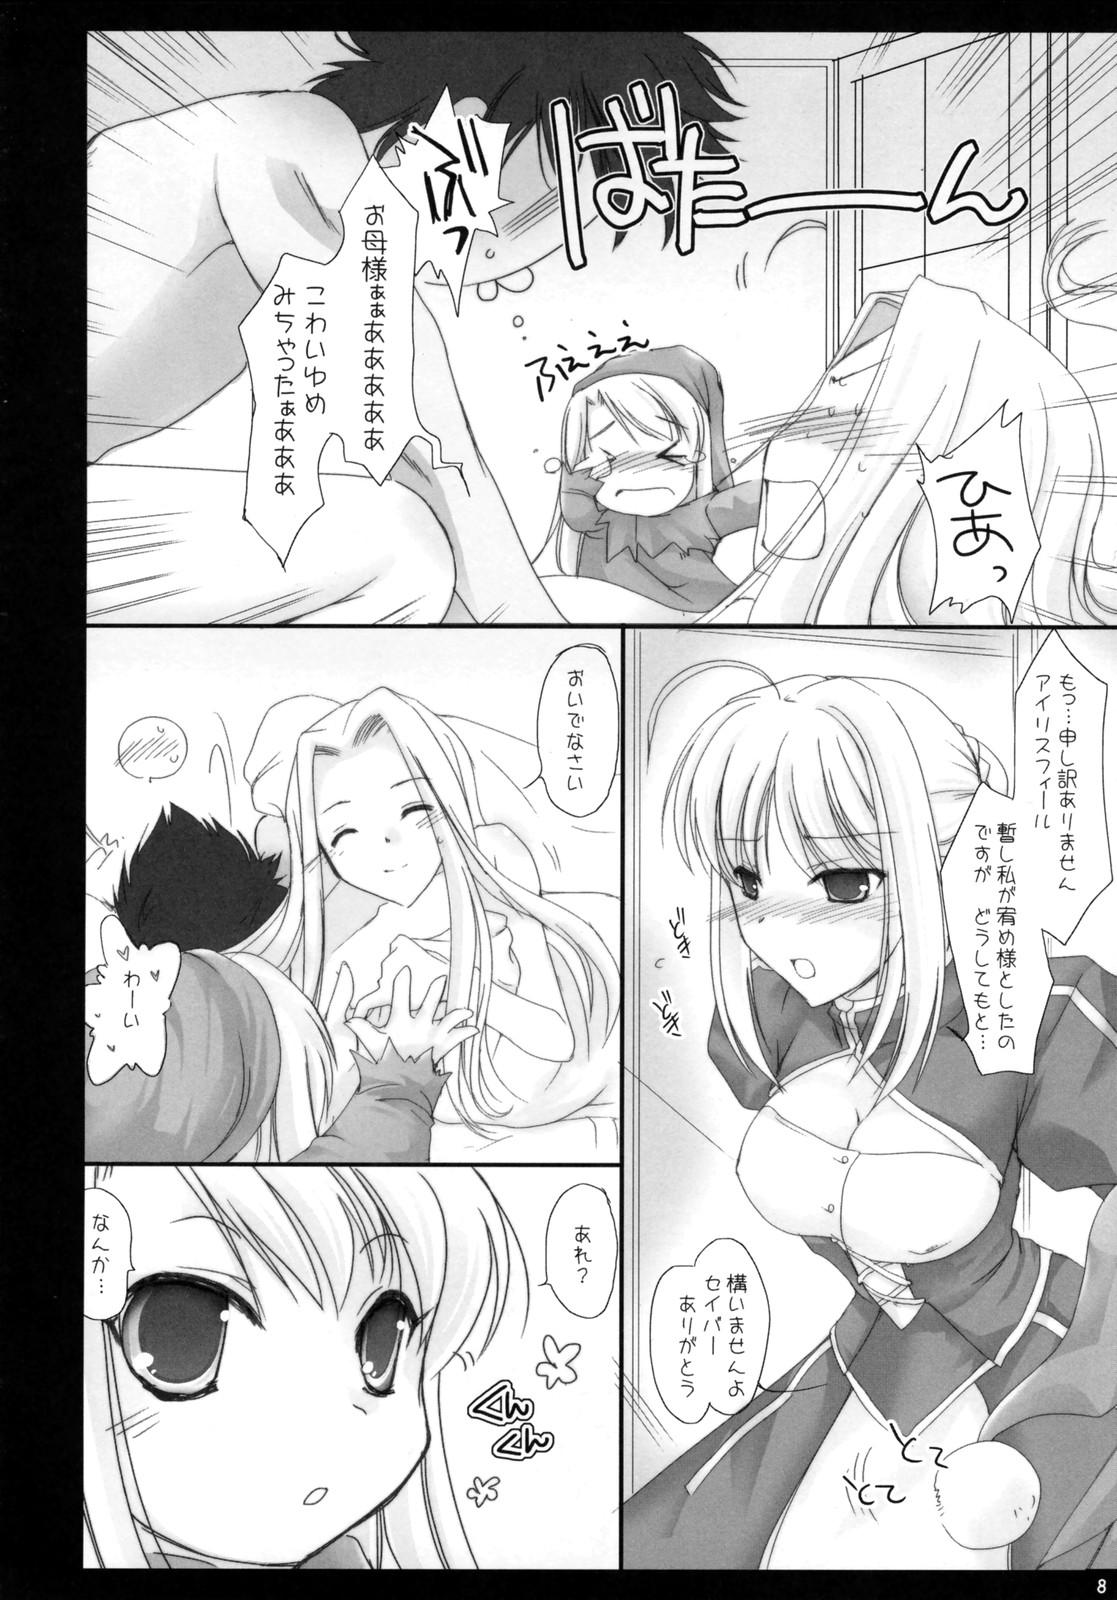 Clothed √Zero. - Fate stay night Fate zero Teen Porn - Page 7